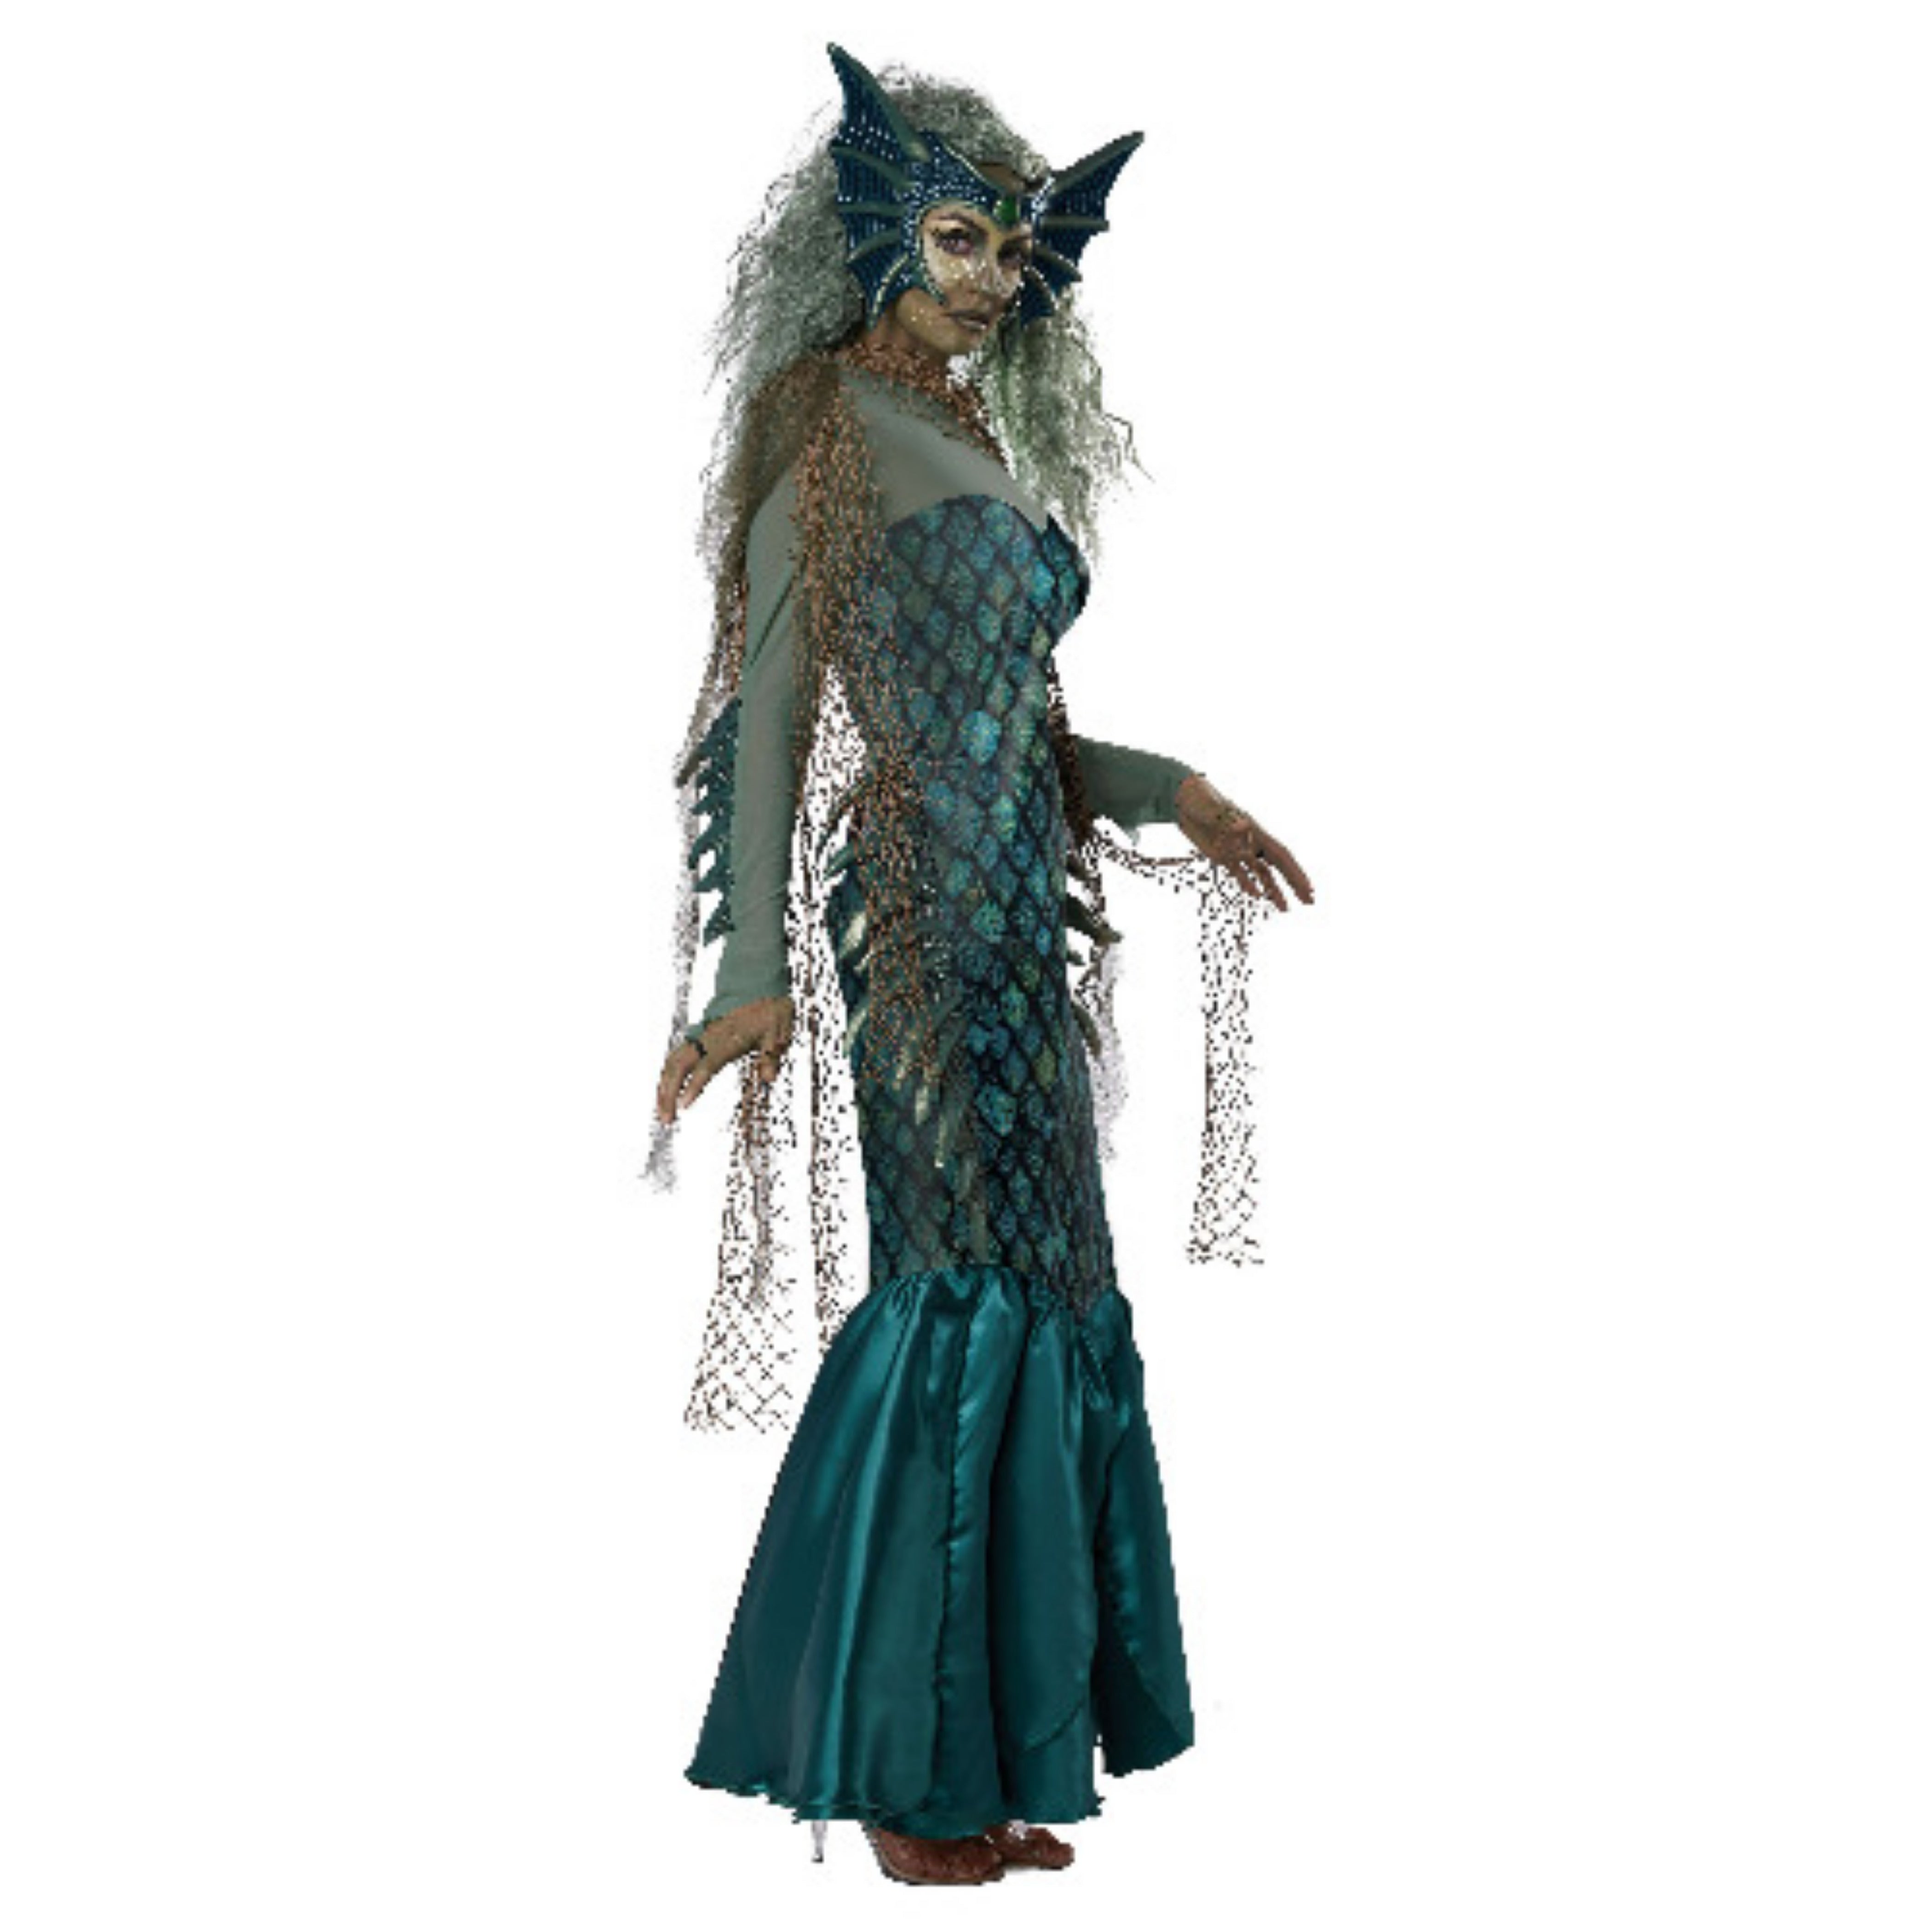 The Mermaid Costume Kit, Burlesque Wig and Plastic Pearl Necklace